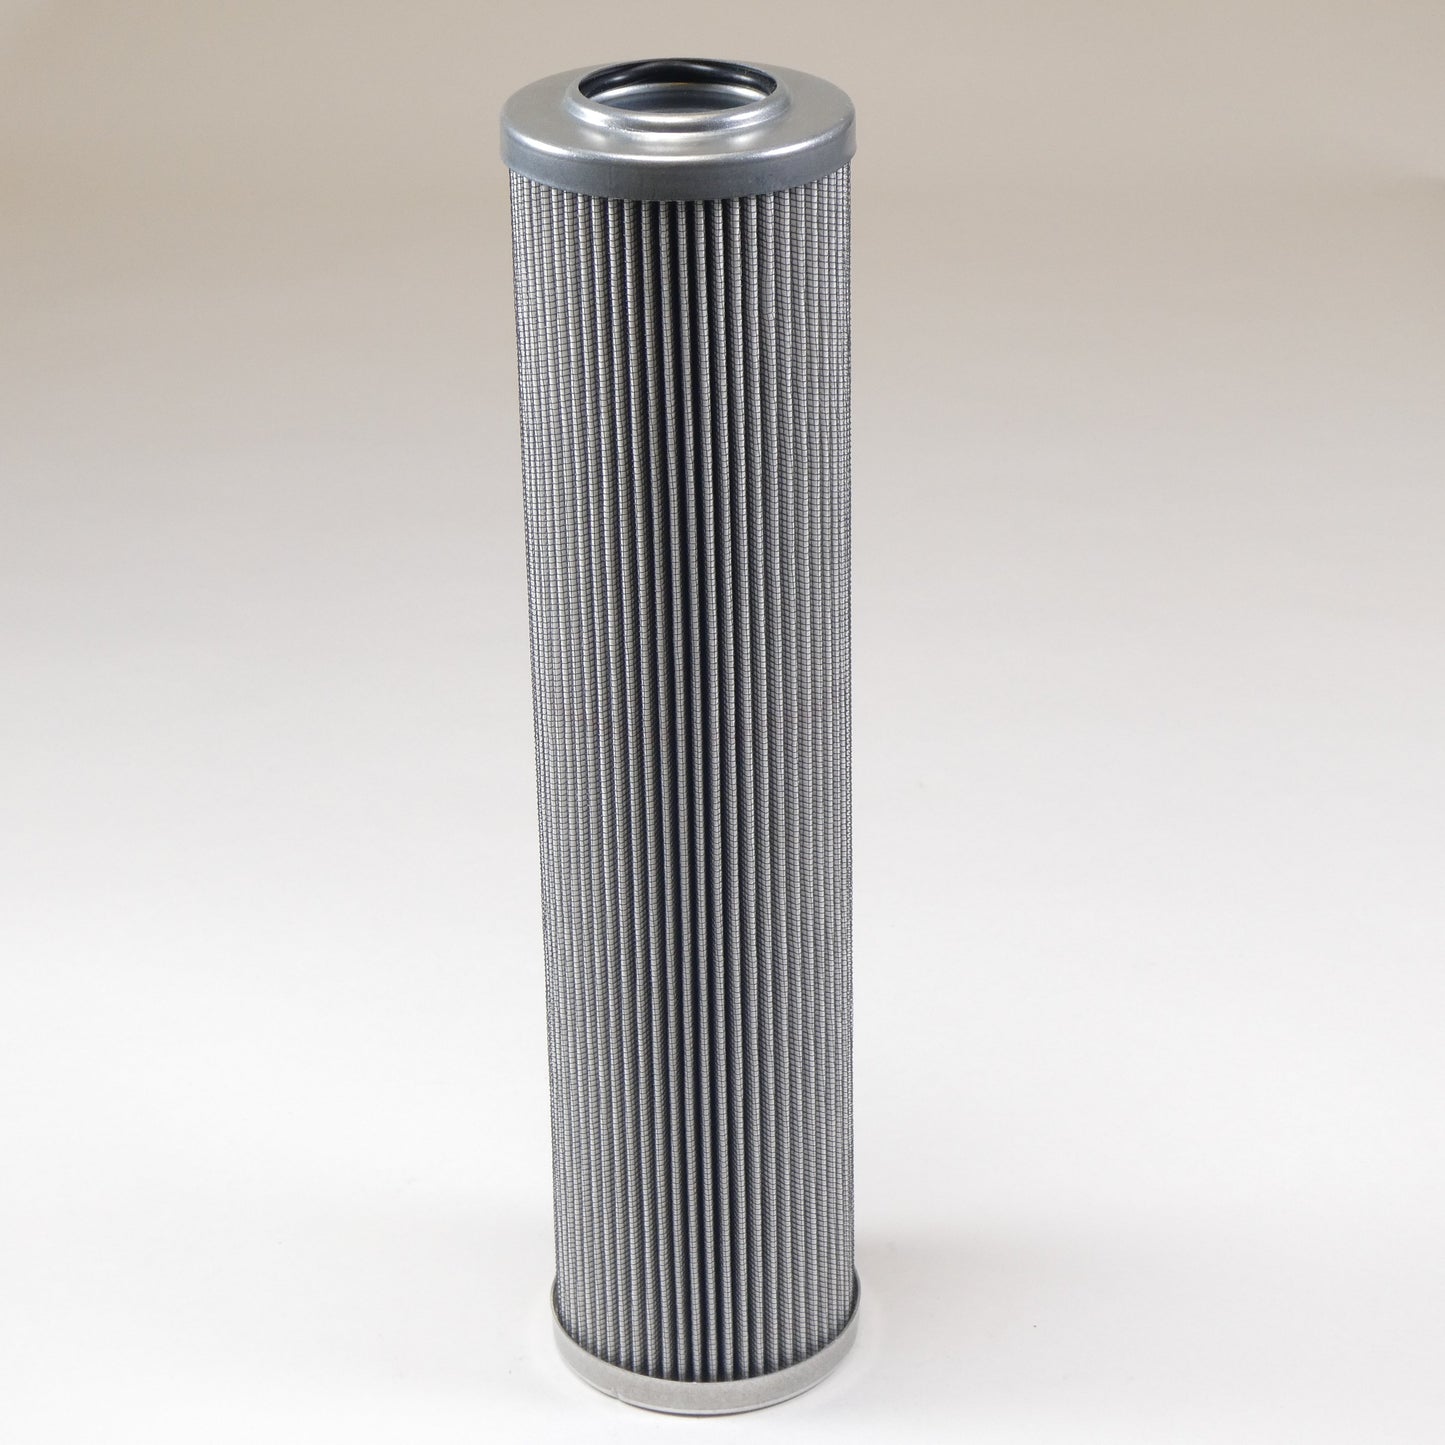 Hydrafil Replacement Filter Element for Hilco 3830-14-006-C